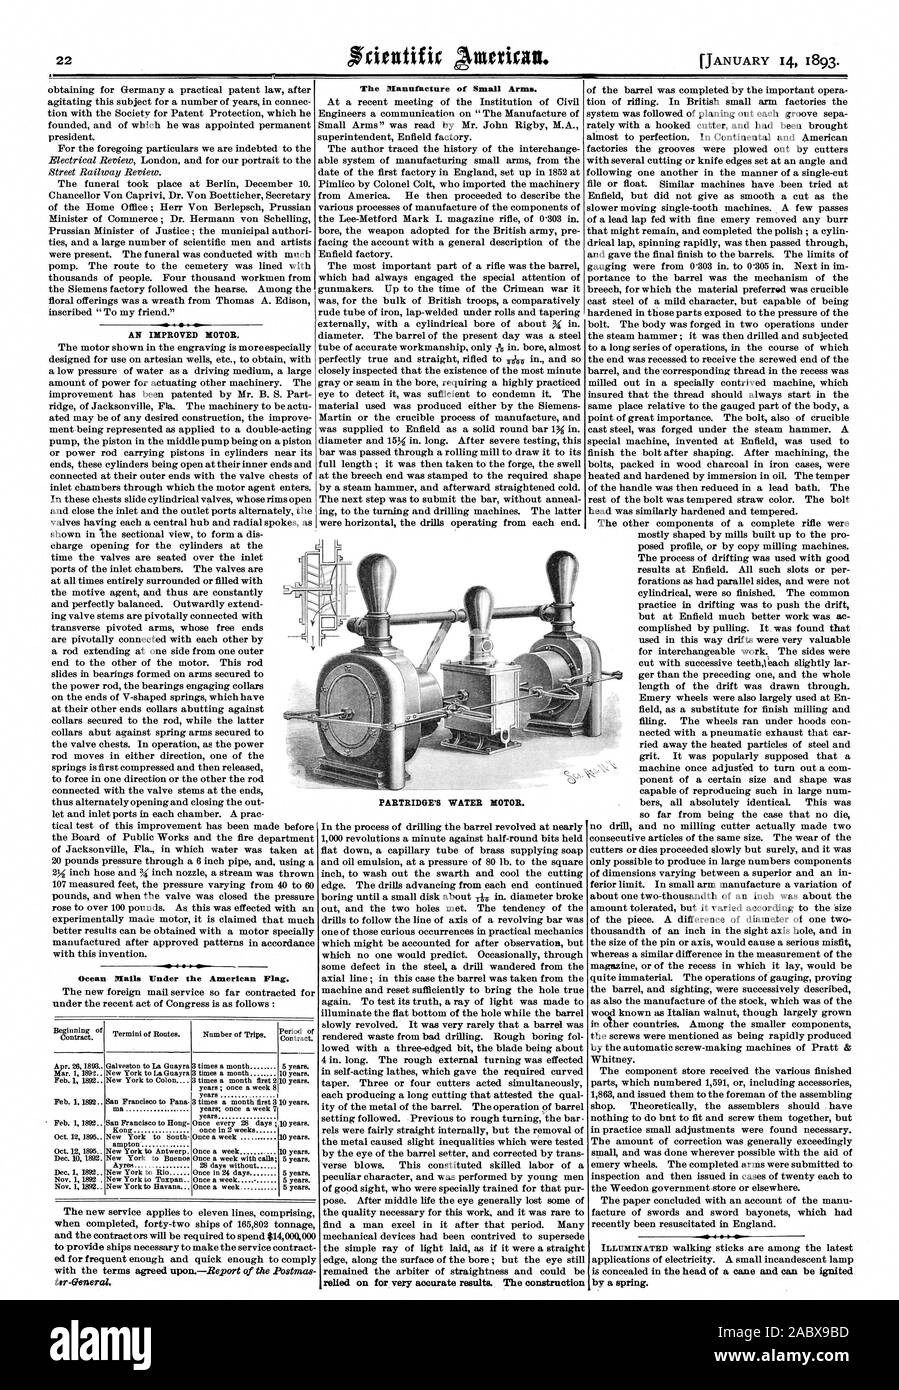 AN IMPROVED MOTOR. Ocean Mails Under the American Flag. The Manufacture of Small Arms. relied on for very accurate results. The construction by a spring. PARTRIDGE'S WATER MOTOR., scientific american, 1893-01-14 Stock Photo